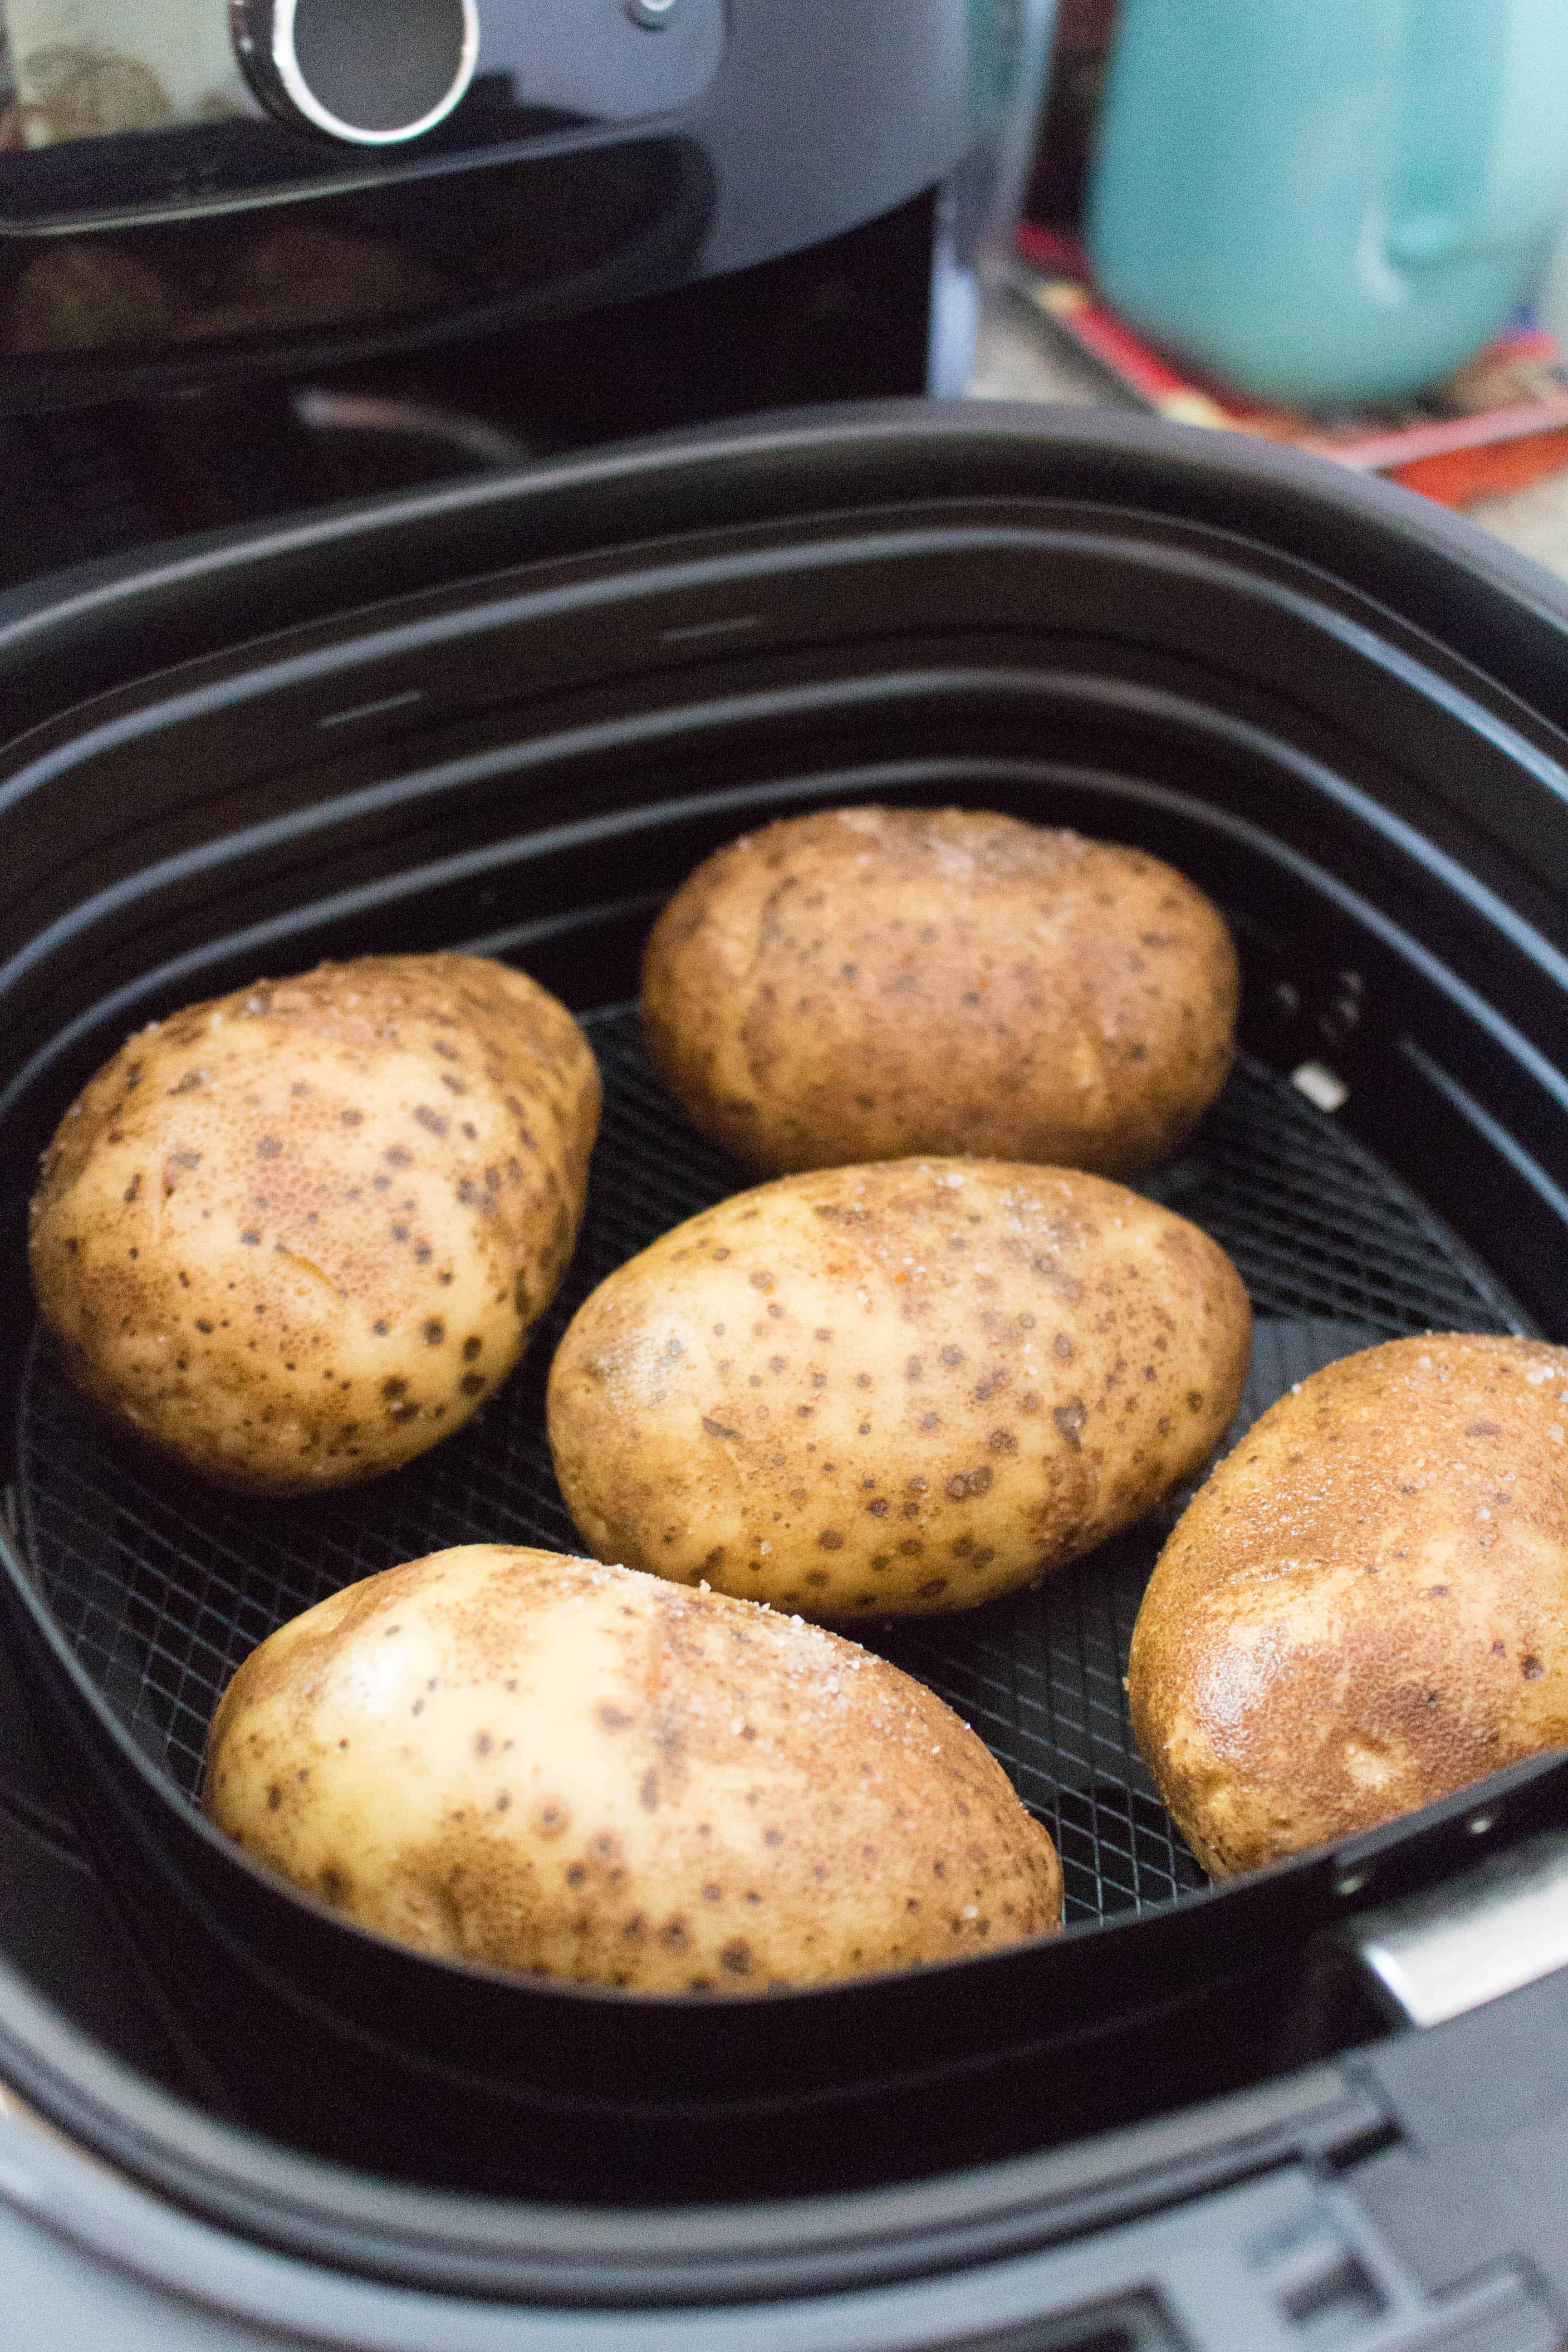 The perfect side dish for a holiday meal or any meal, this airfryer baked potato recipe will have you making flawless baked potatoes every time! 